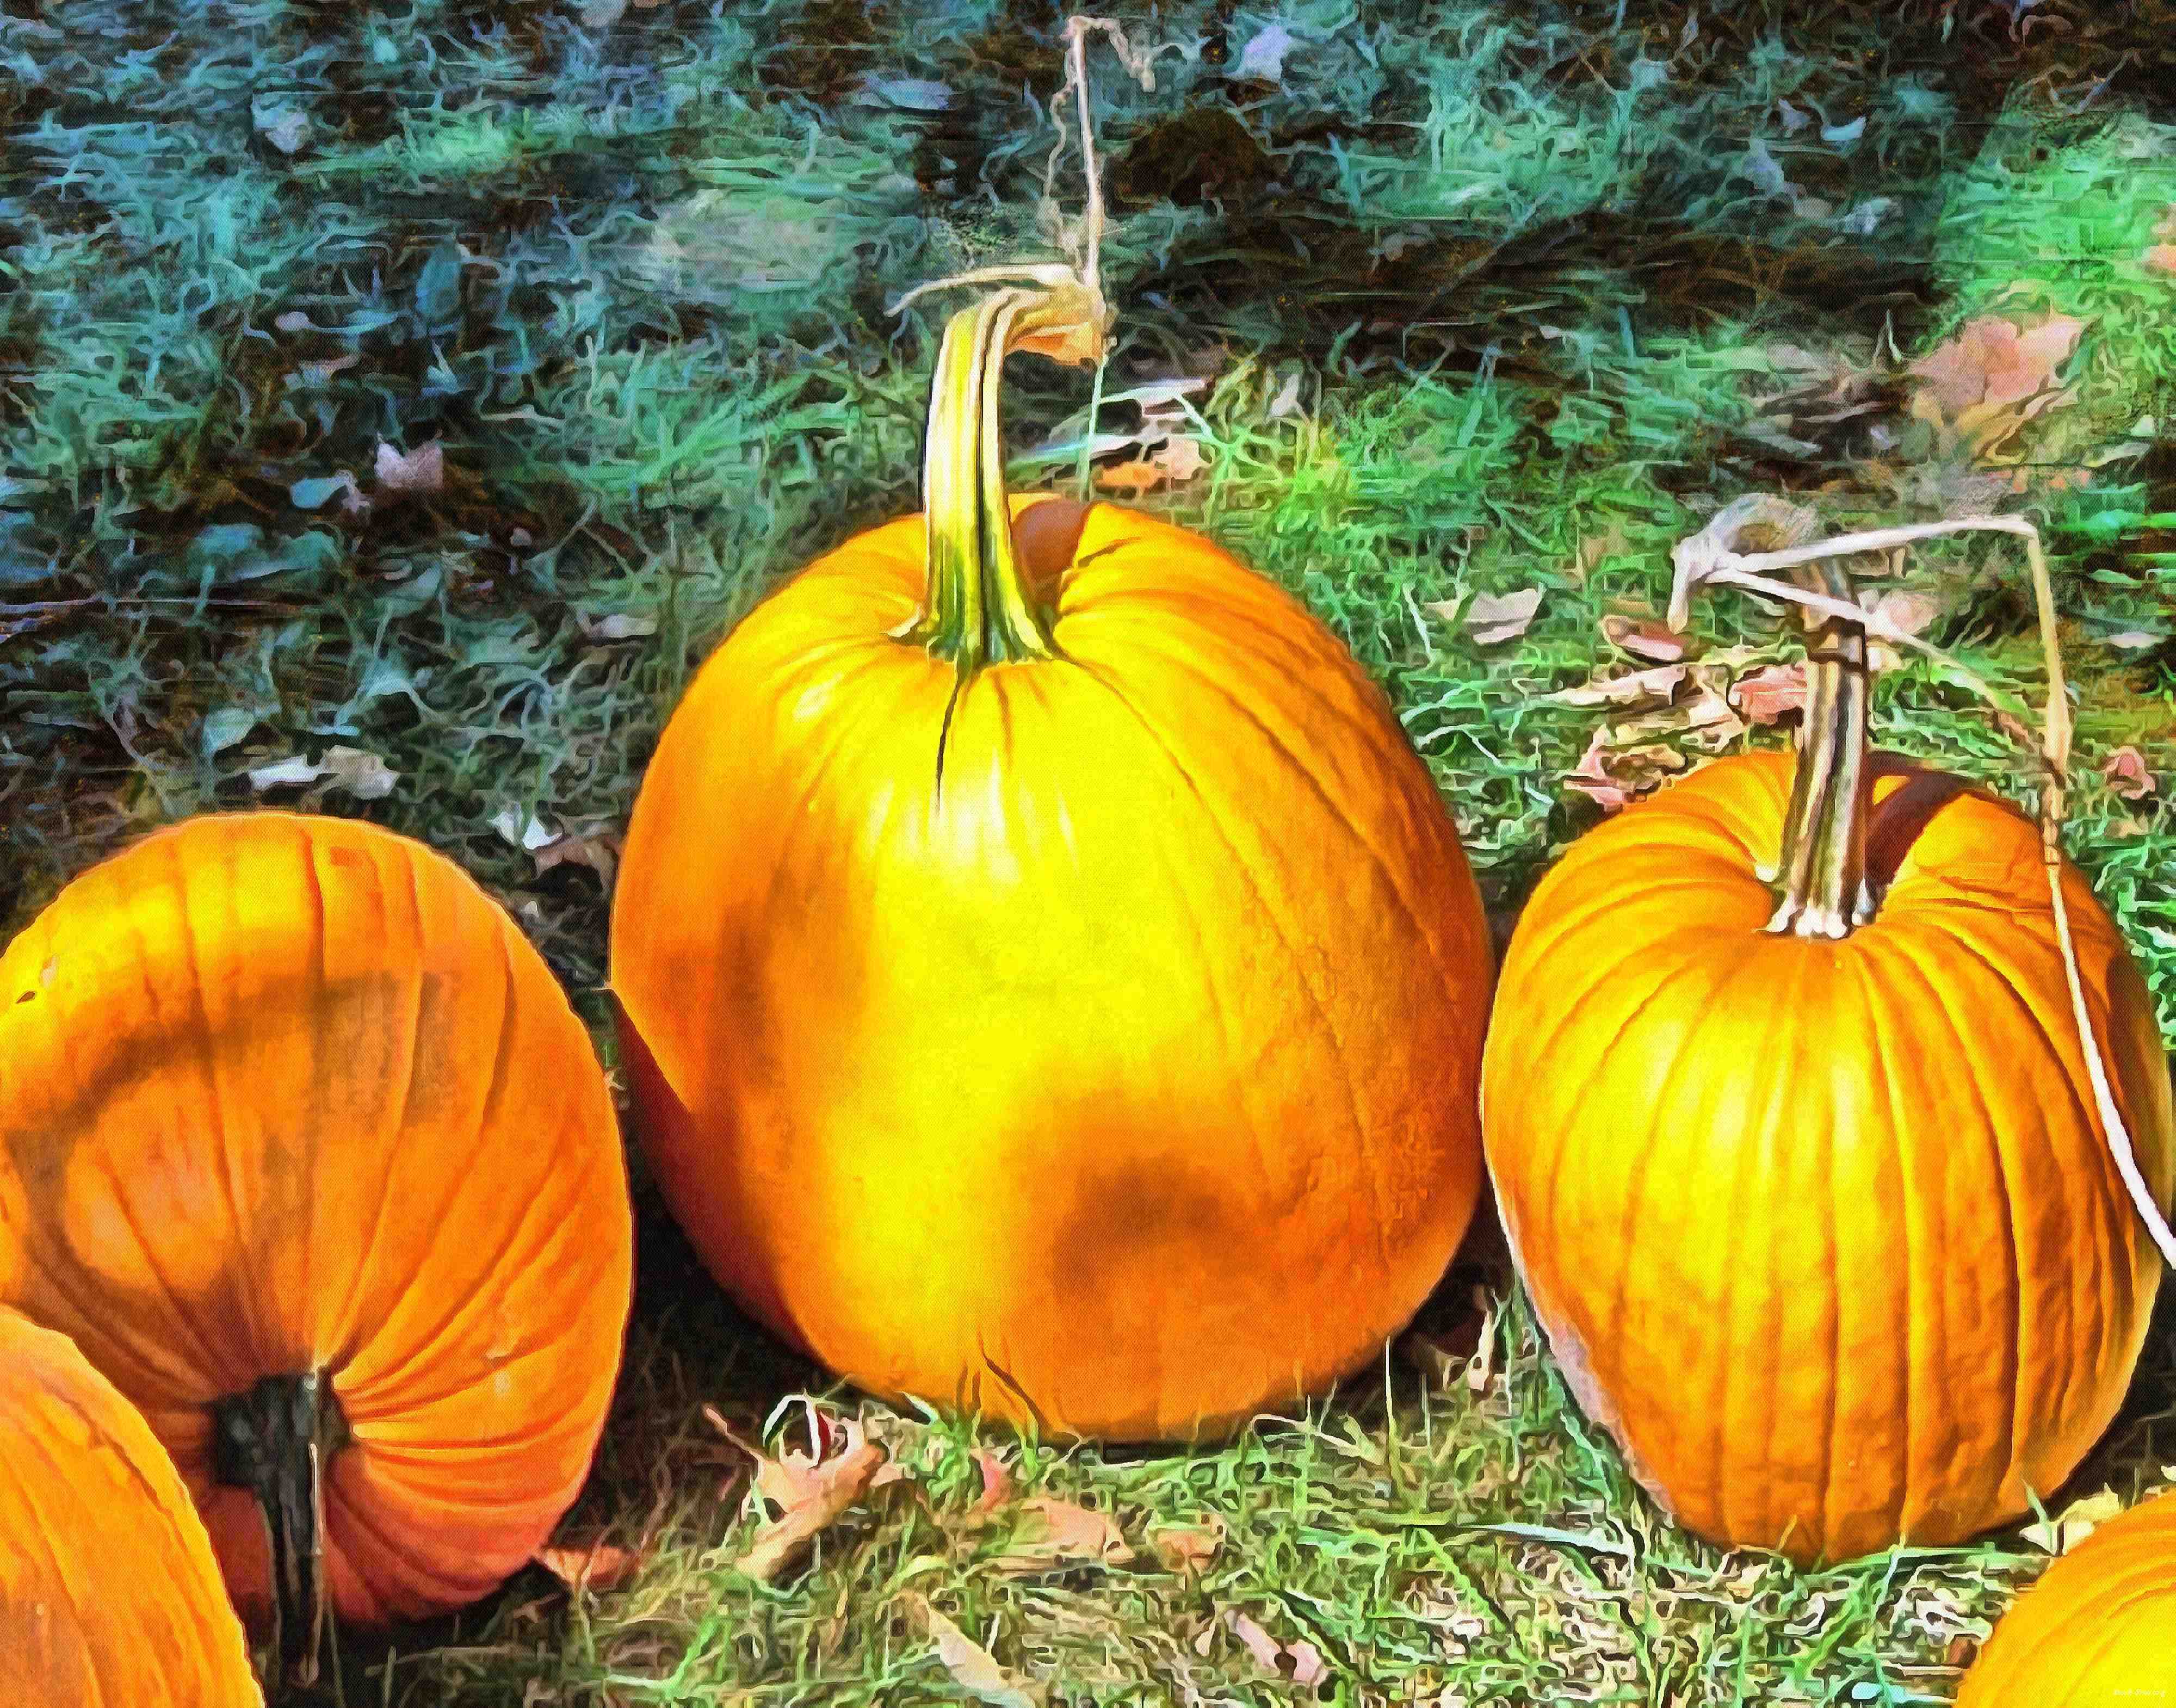 сelebration, pumpkin, holiday, lots of pumpkins, garden, spooky, halloween -  stock free photos, public domain images, download free images, free stock images, public domain